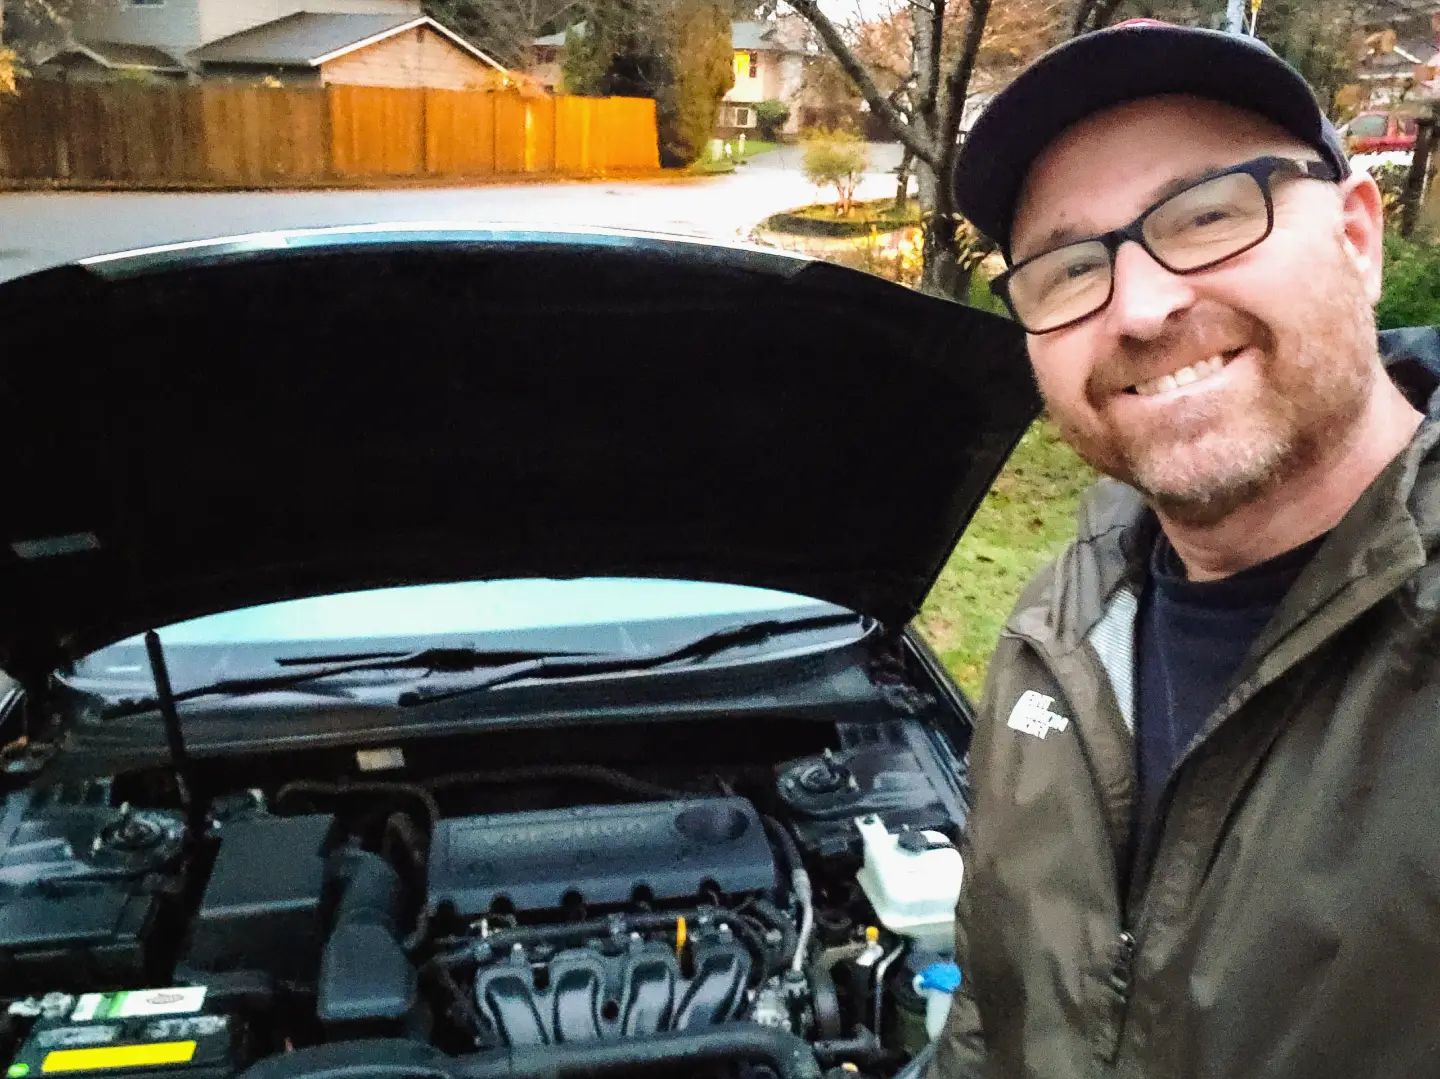 Meet the “youtuber dad” who teaches practical tips for a good reason